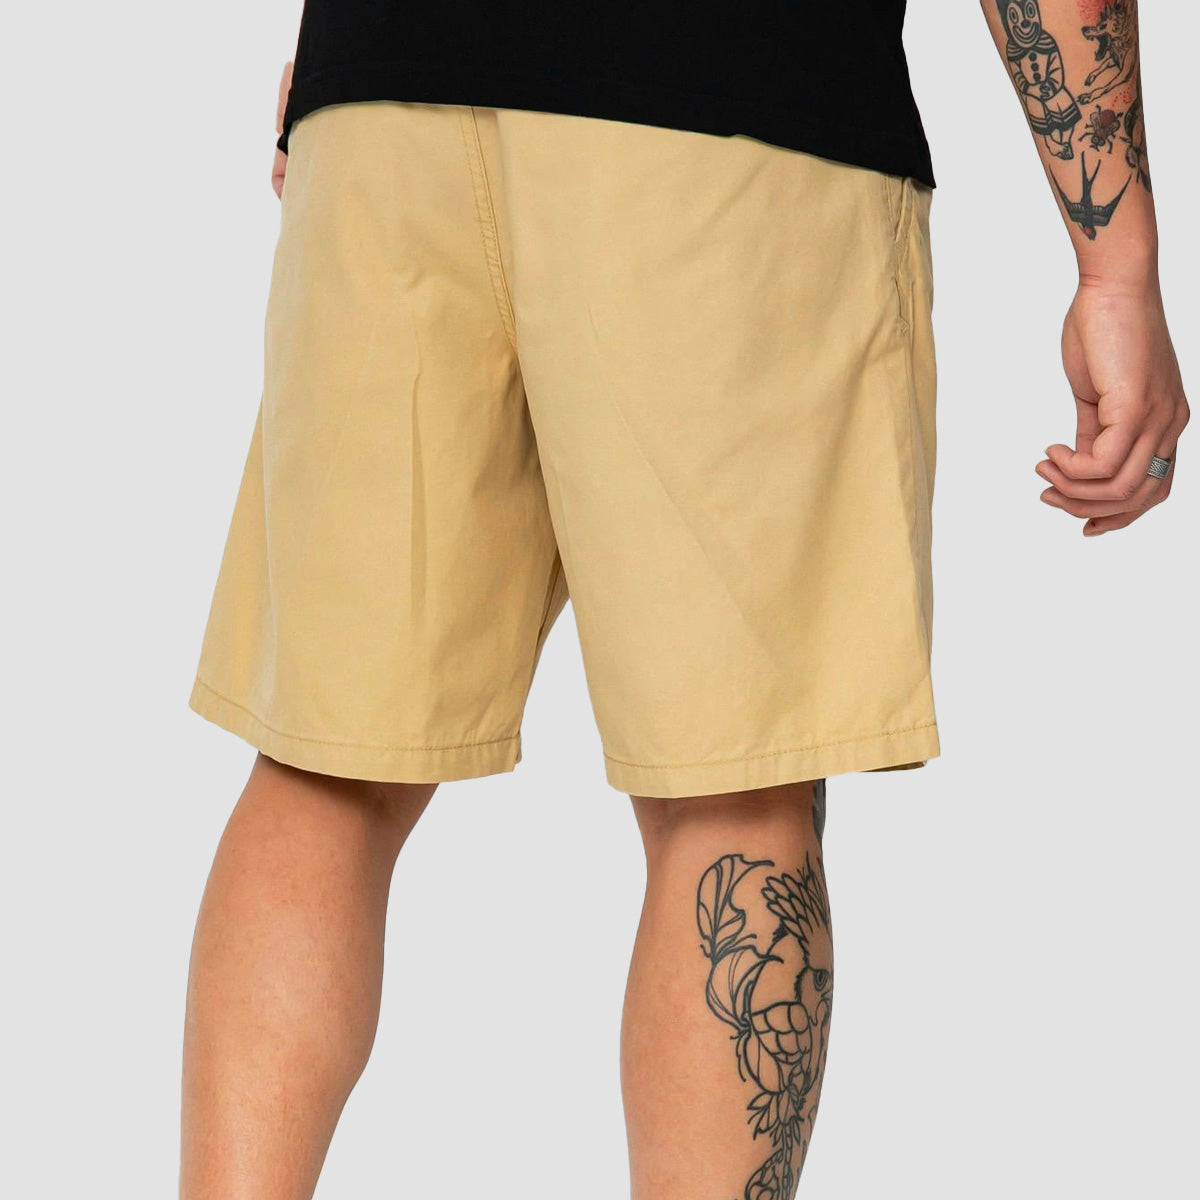 Vans Authentic Chino Pleated Loose Shorts Taos Taupe